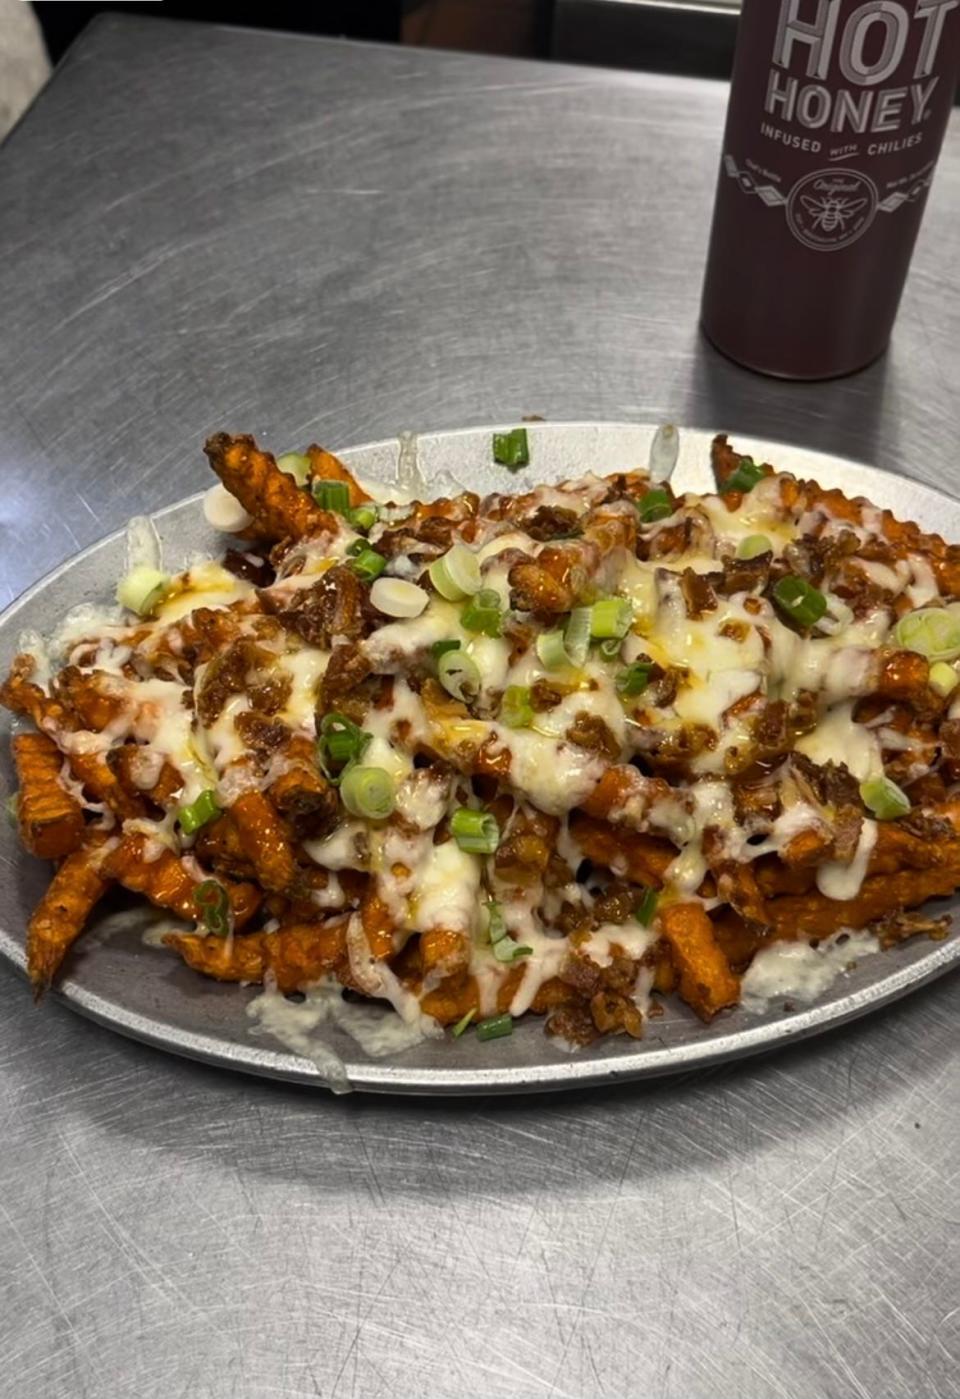 Loaded sweet potato fries come topped with Mike's Hot Honey sauce at Sidelines Bar & Grill in Fairfield, New Jersey.